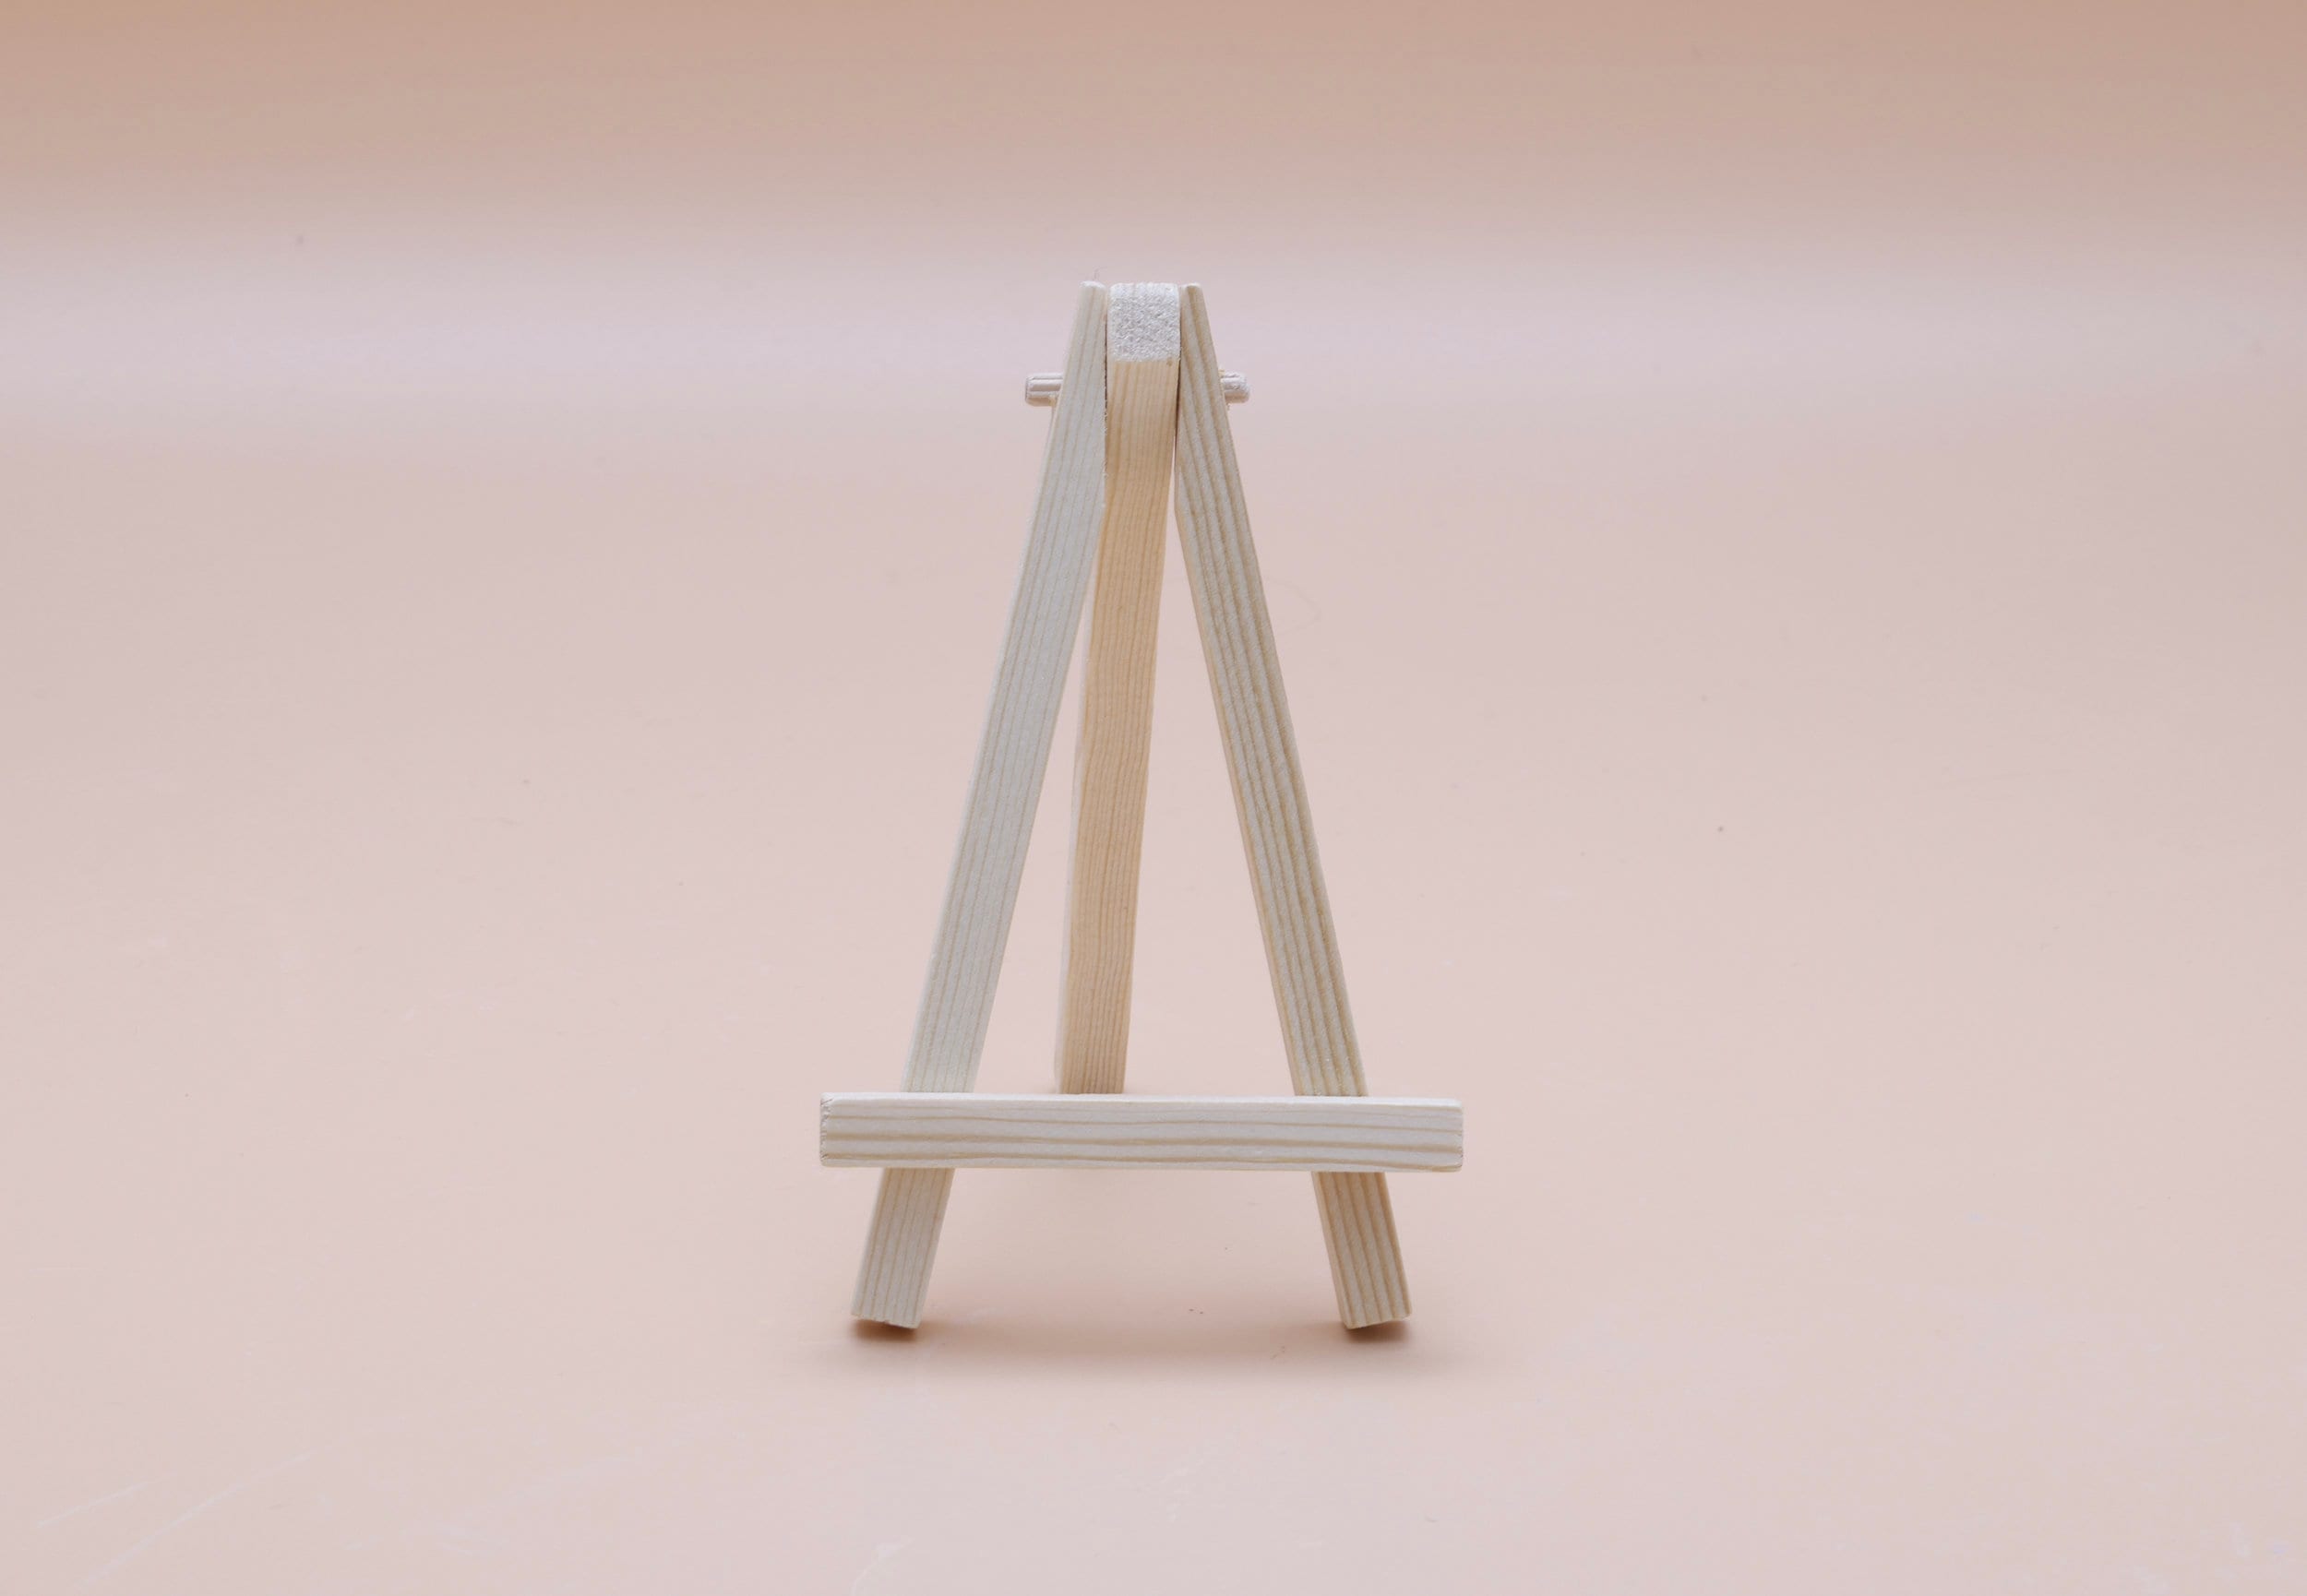 Easel Back to Support Your Photo, Foam Board or Matt Board, Easel,  Cardboard Easel, Single Wing Easel, Chipboard Easel, Arts & Crafts, Stand 